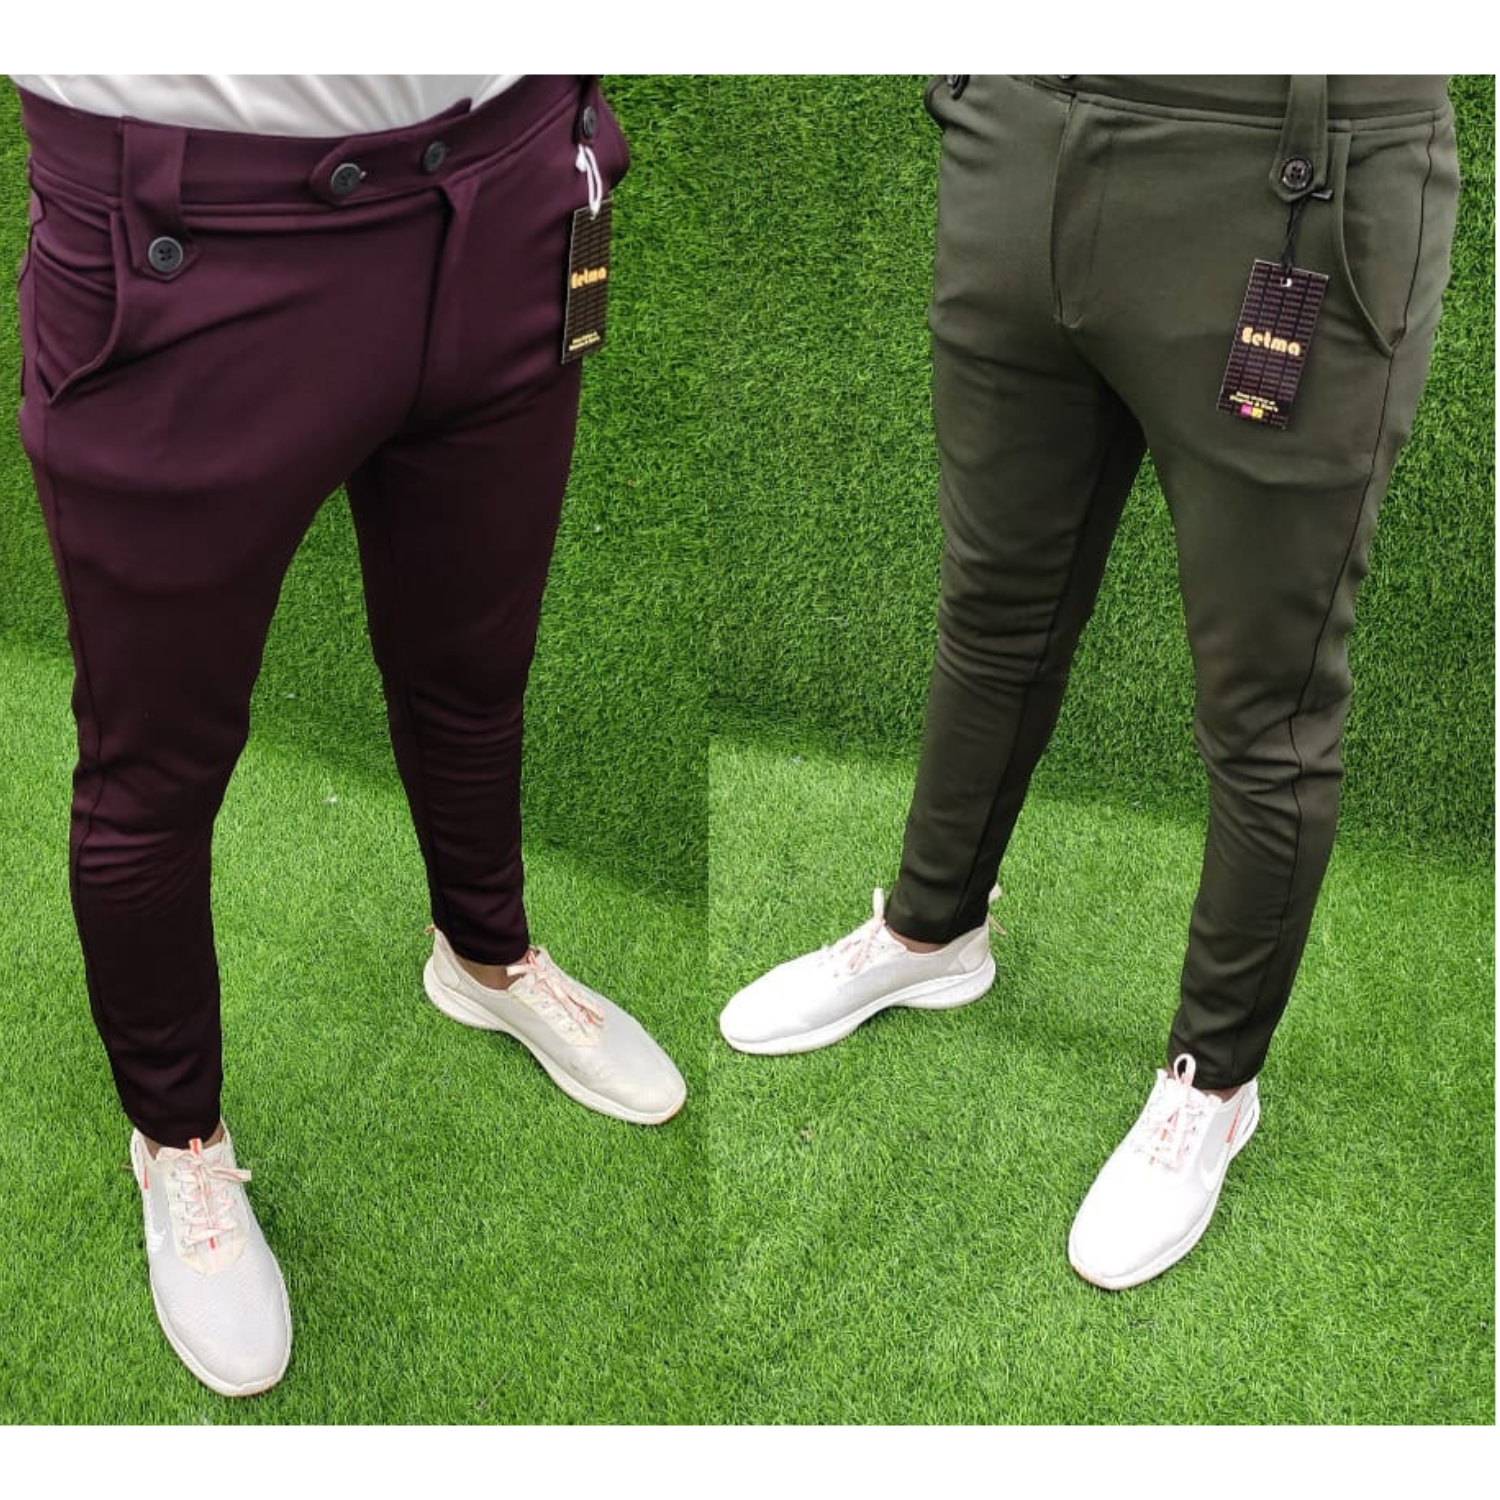 Eetma Comfortable and Stylish Trousers 